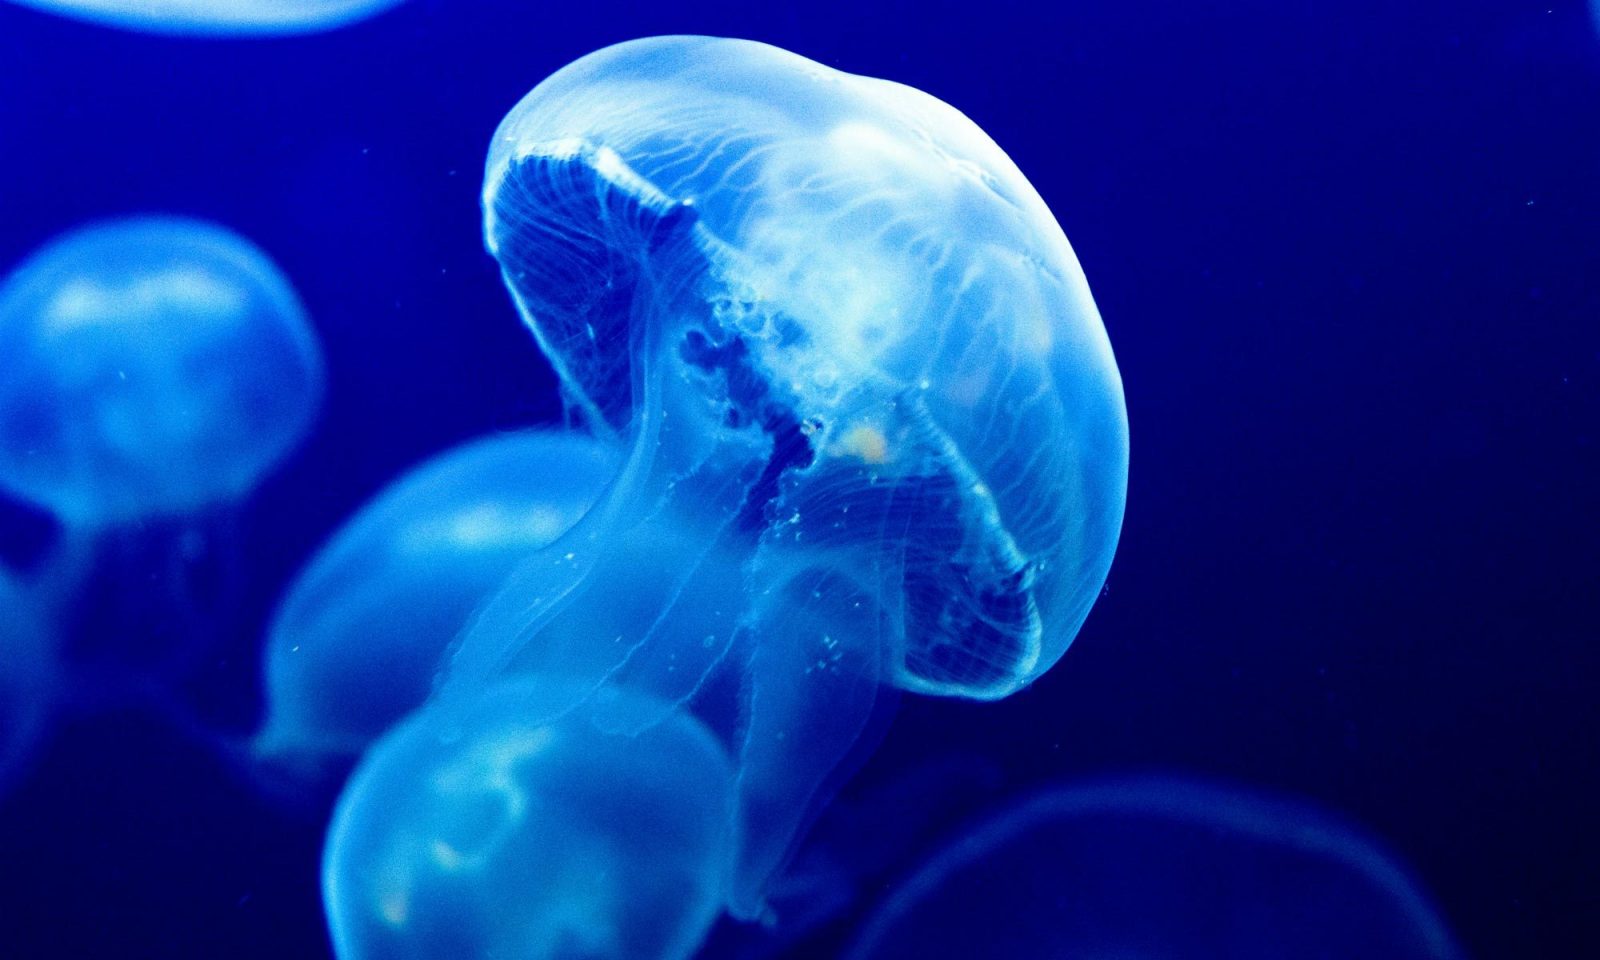 Unfortunately, Only 10% Of the Population Will Be Able to Score 100% On This Science Quiz Jellyfish